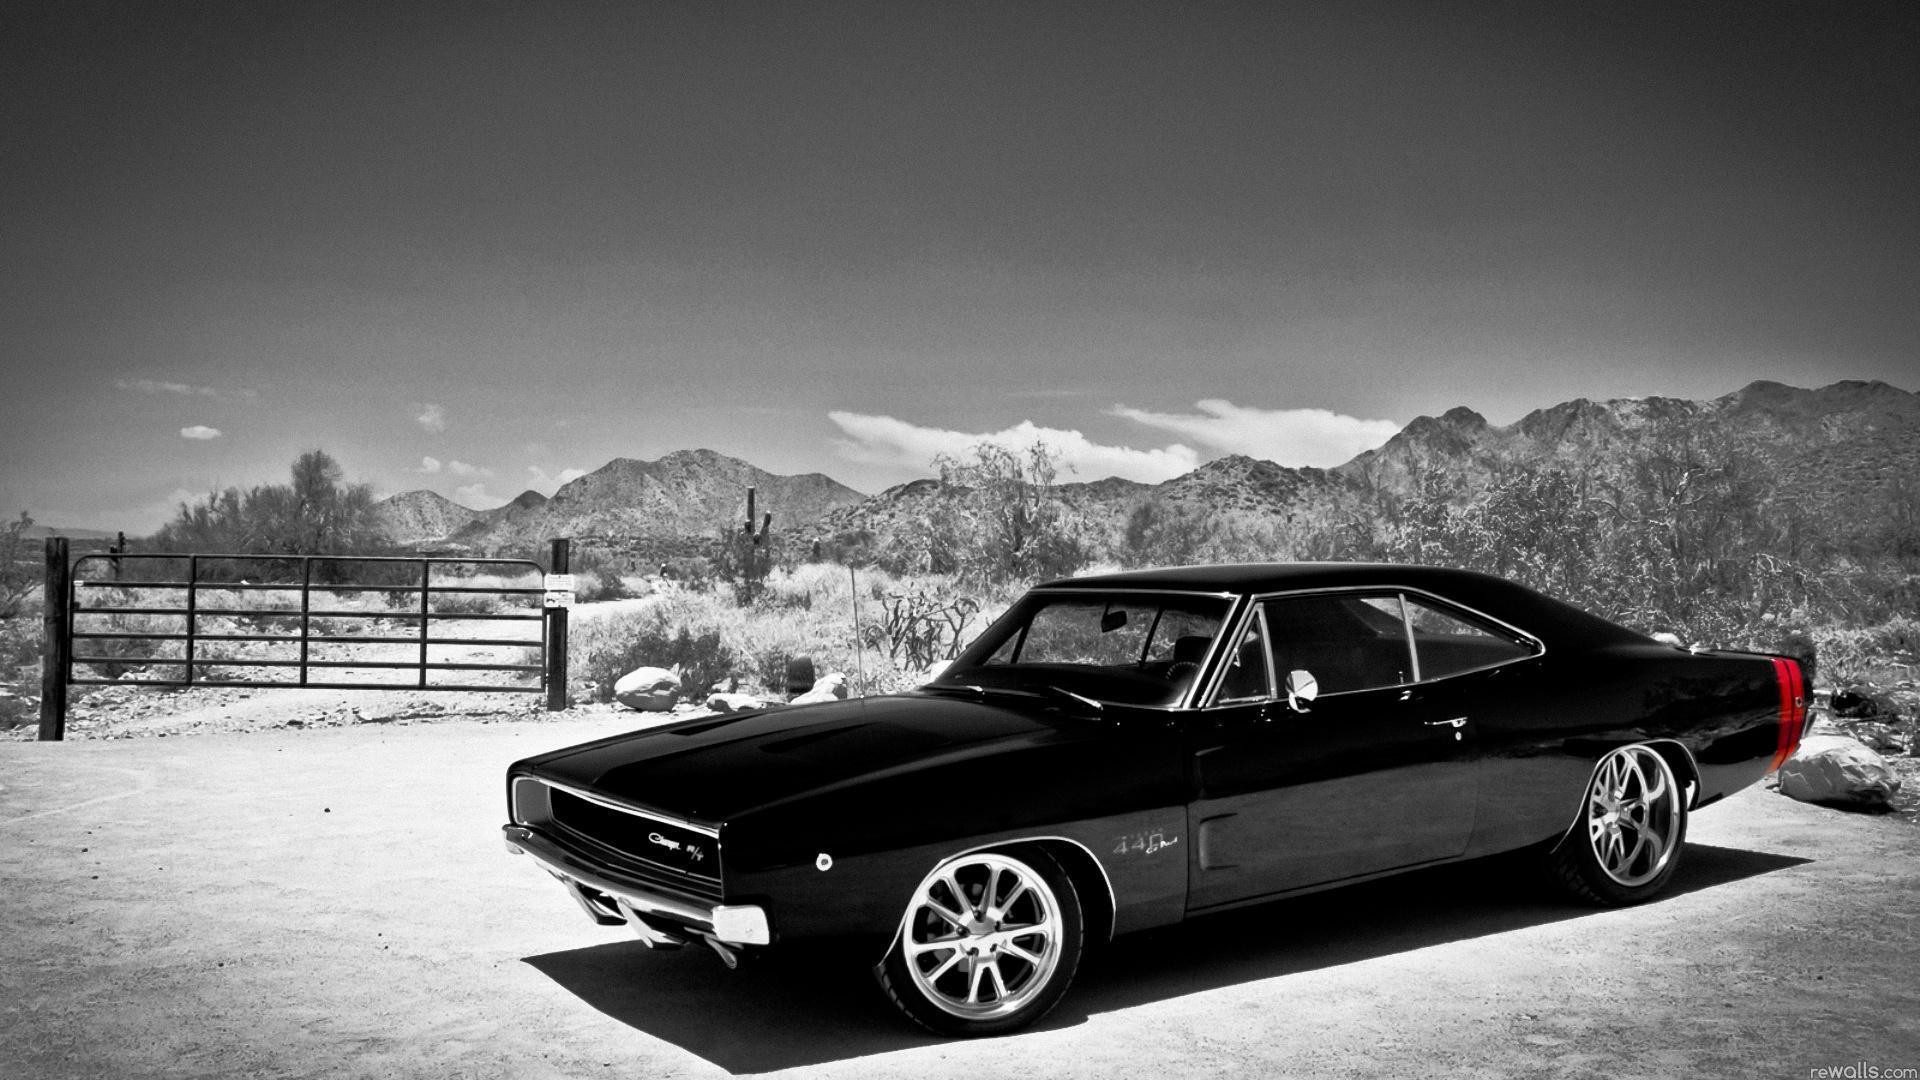 1920x1080 Free Muscle Car Wallpapers - Wallpaper Cave